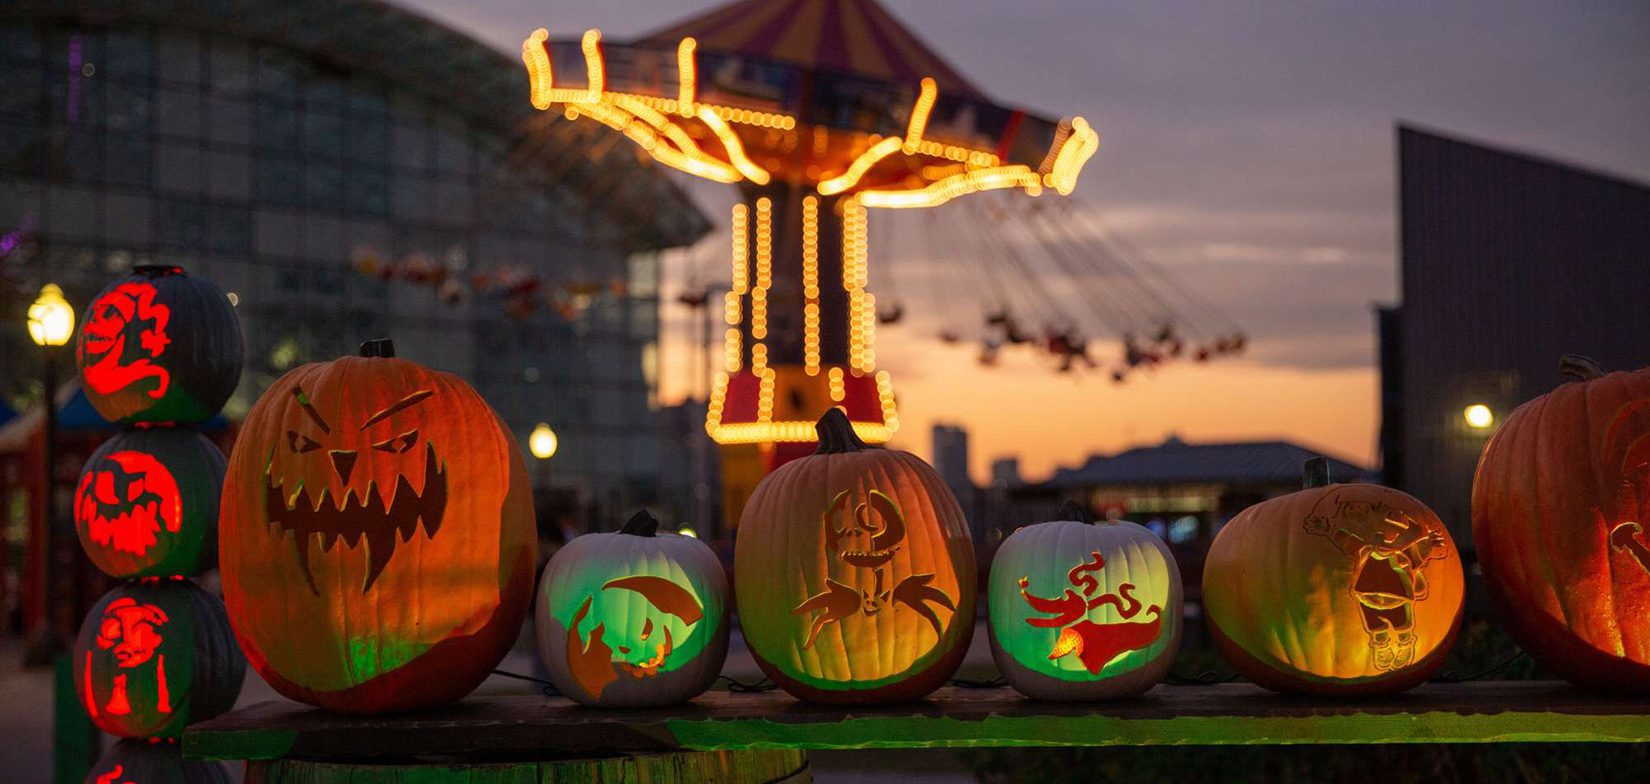 Navy Pier to Host Pier Pumpkin Lights Pop-Up Experience Throughout October for the First Time Since Start of Pandemic